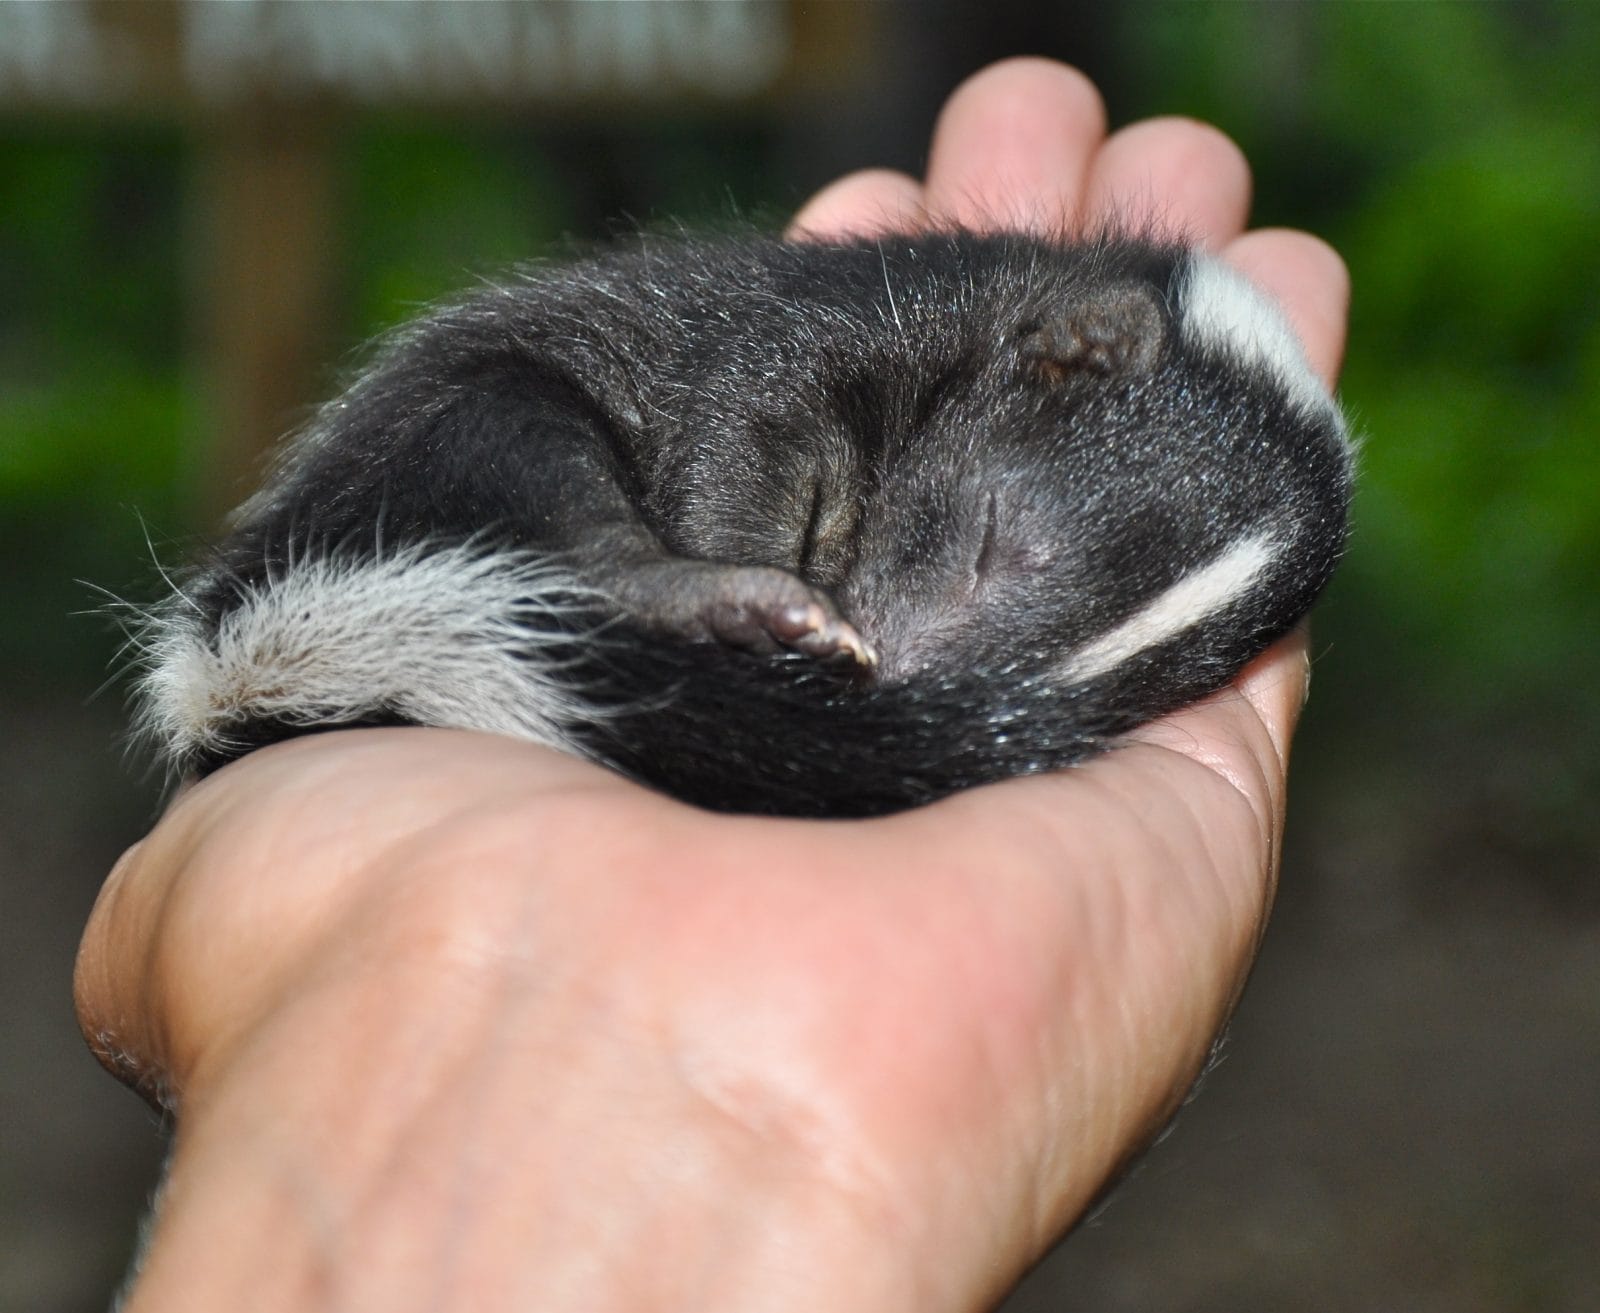 Family Rescues Scared Newborn Skunk During Bike Ride